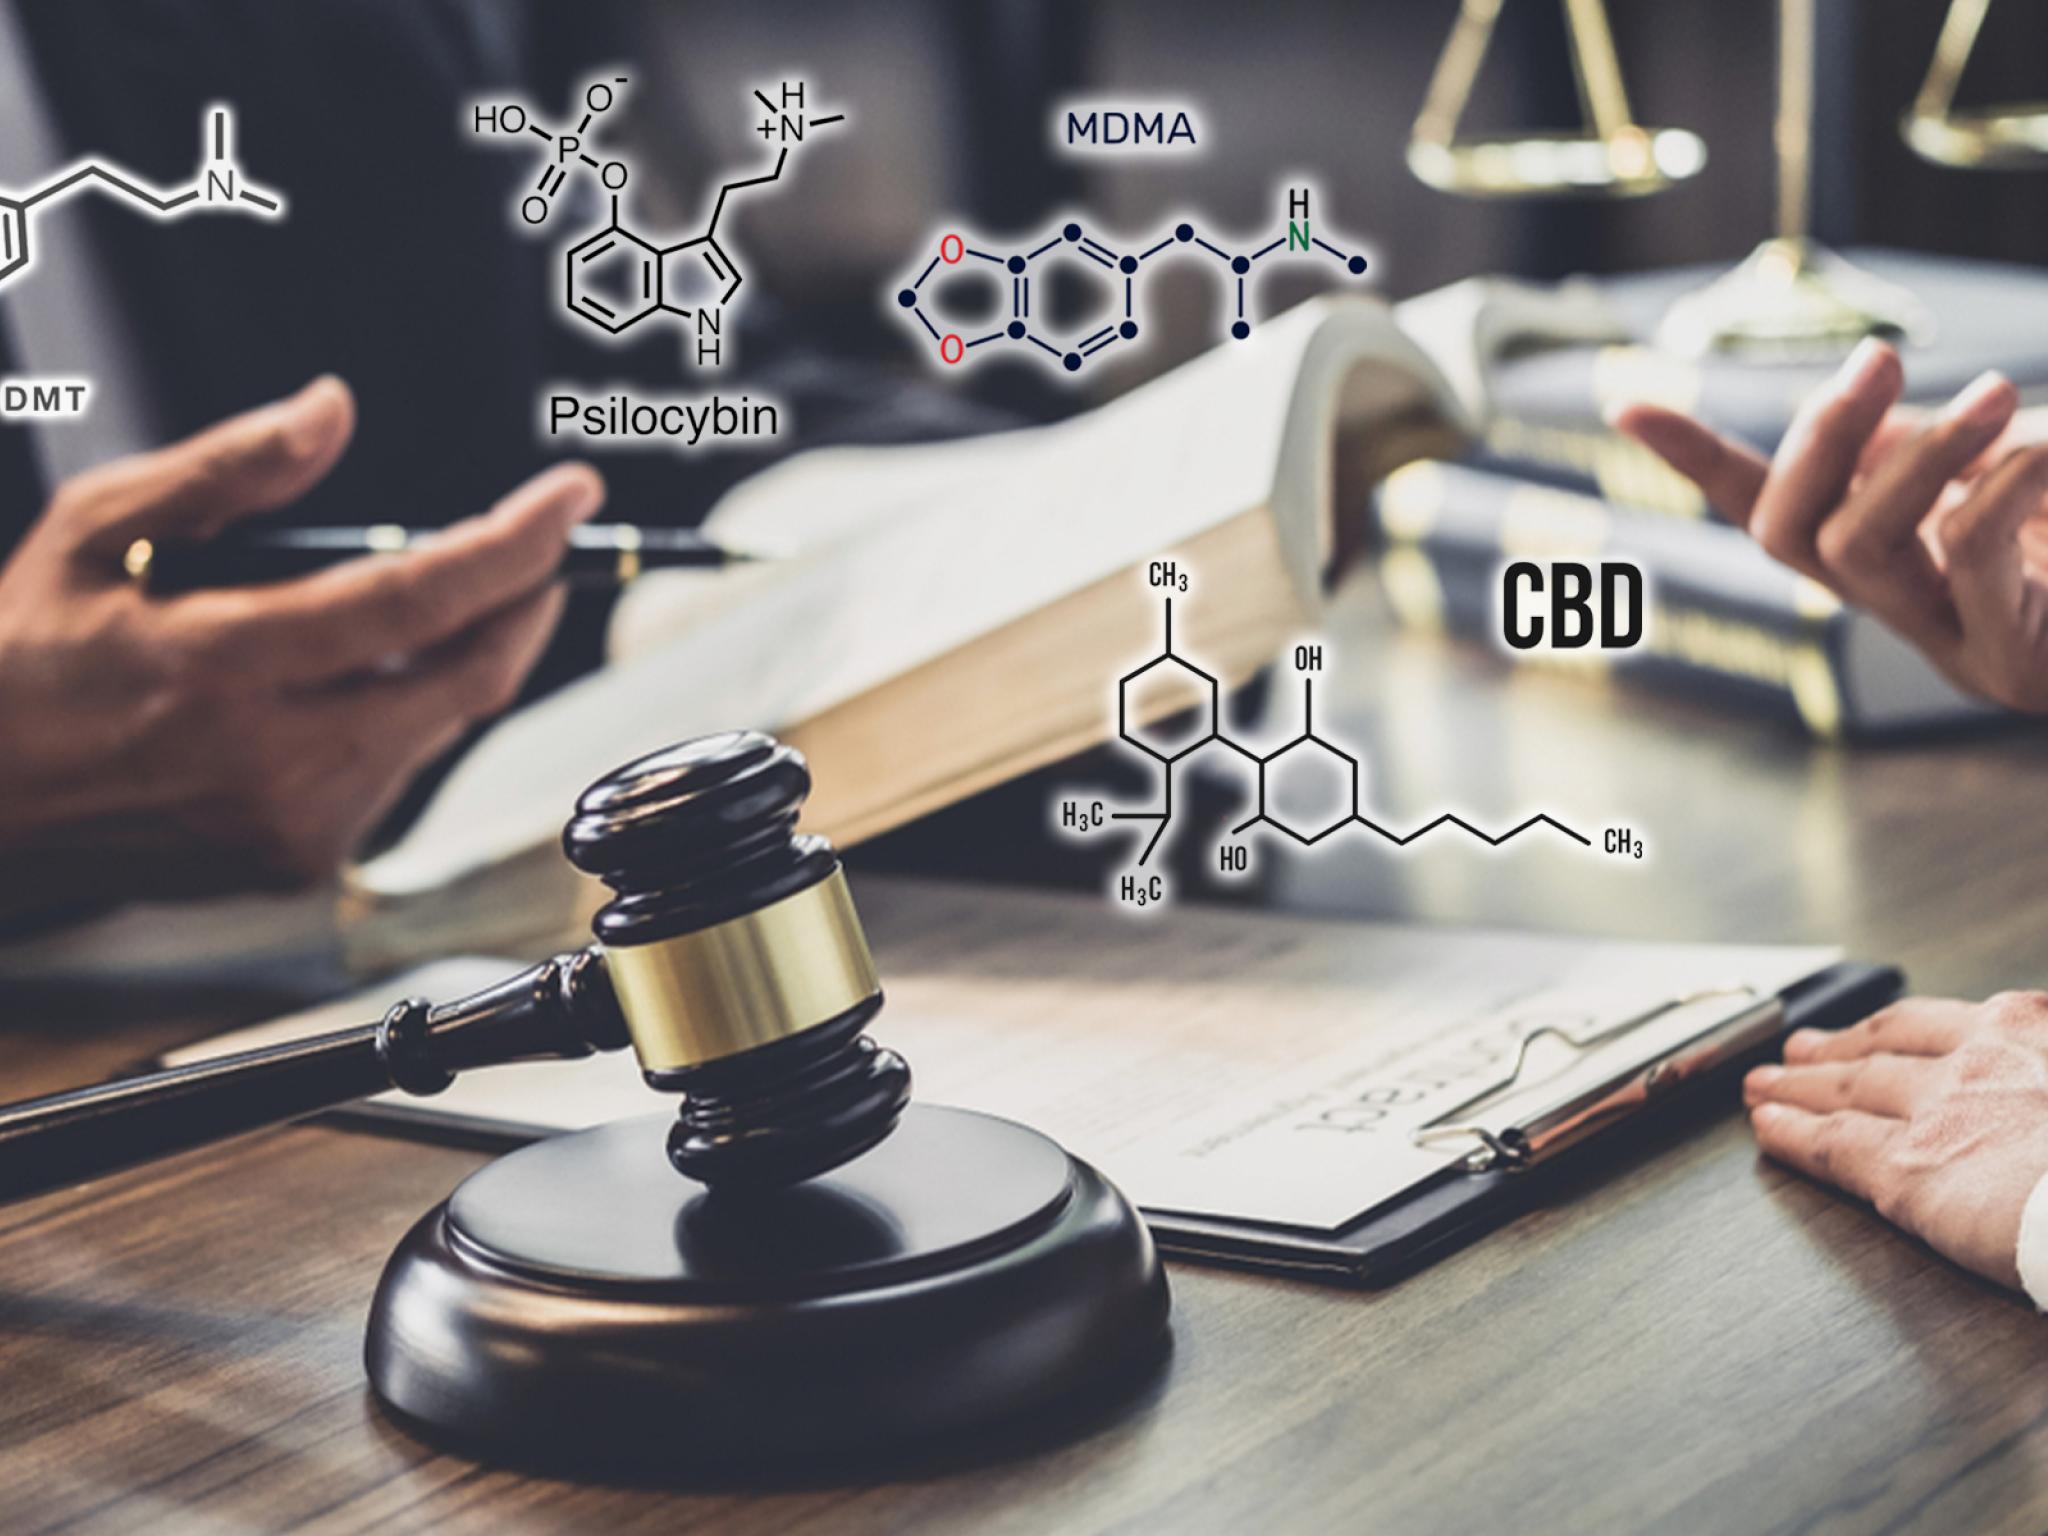  two-major-psychedelics-companies-take-novel-chemical-entity-patent-battle-to-federal-court 